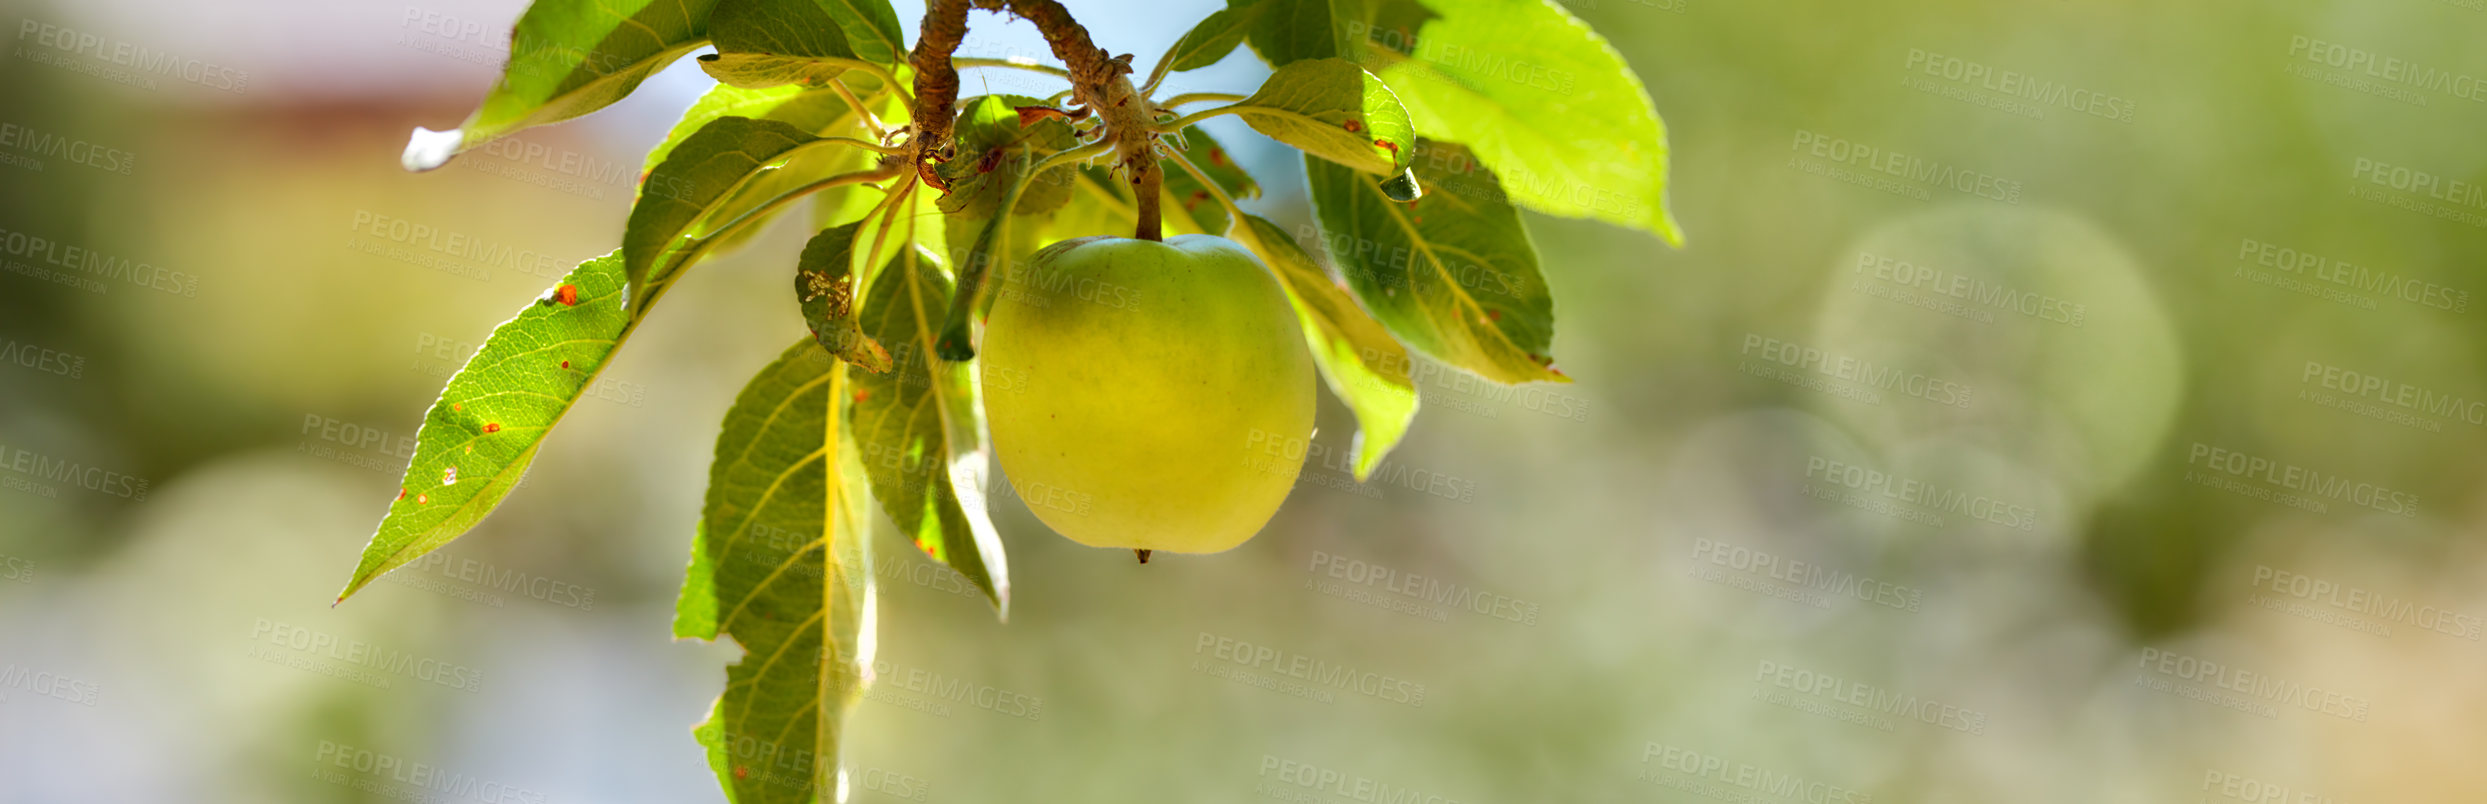 Buy stock photo Wide angle of single green apple isolated against a bokeh green background. Fruit and leaves hanging on branch of tree in an orchard outside. Fresh produce on organic farm for sustainable agriculture